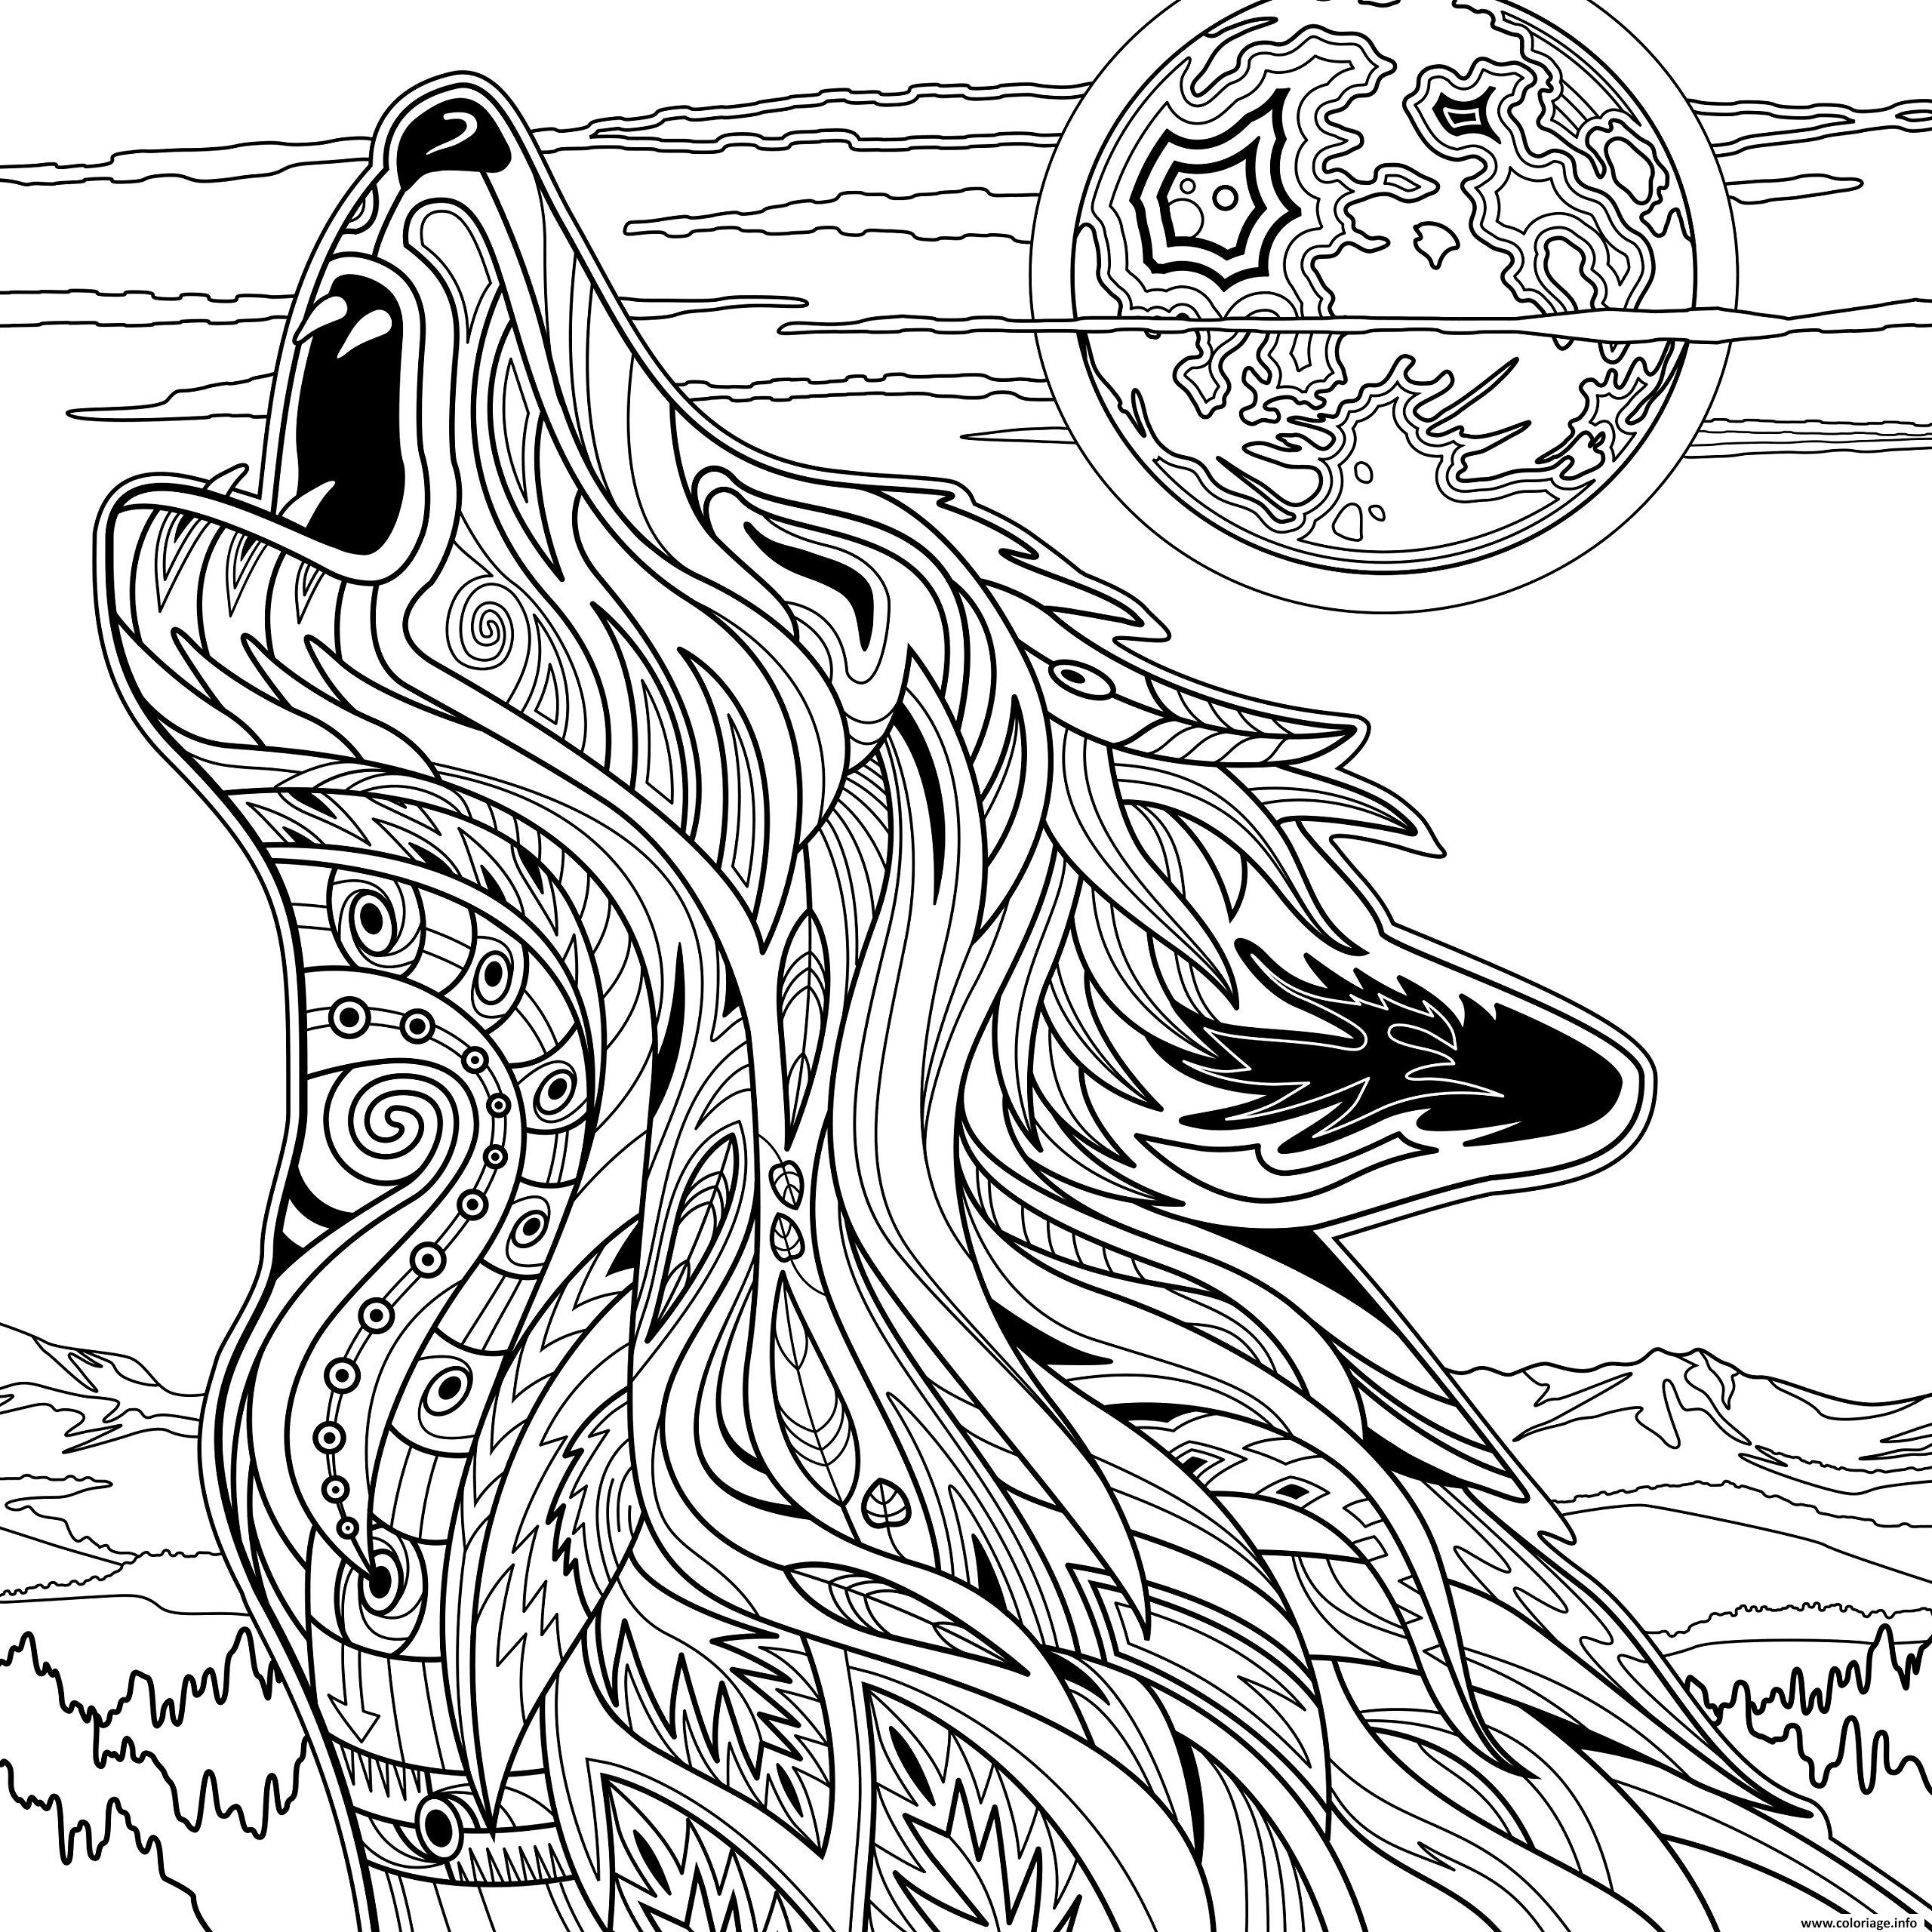 Coloriage Adulte Loup Animaux Yellowstone National Park Dessin Adulte À à Coloriage Animaux A Imprimer